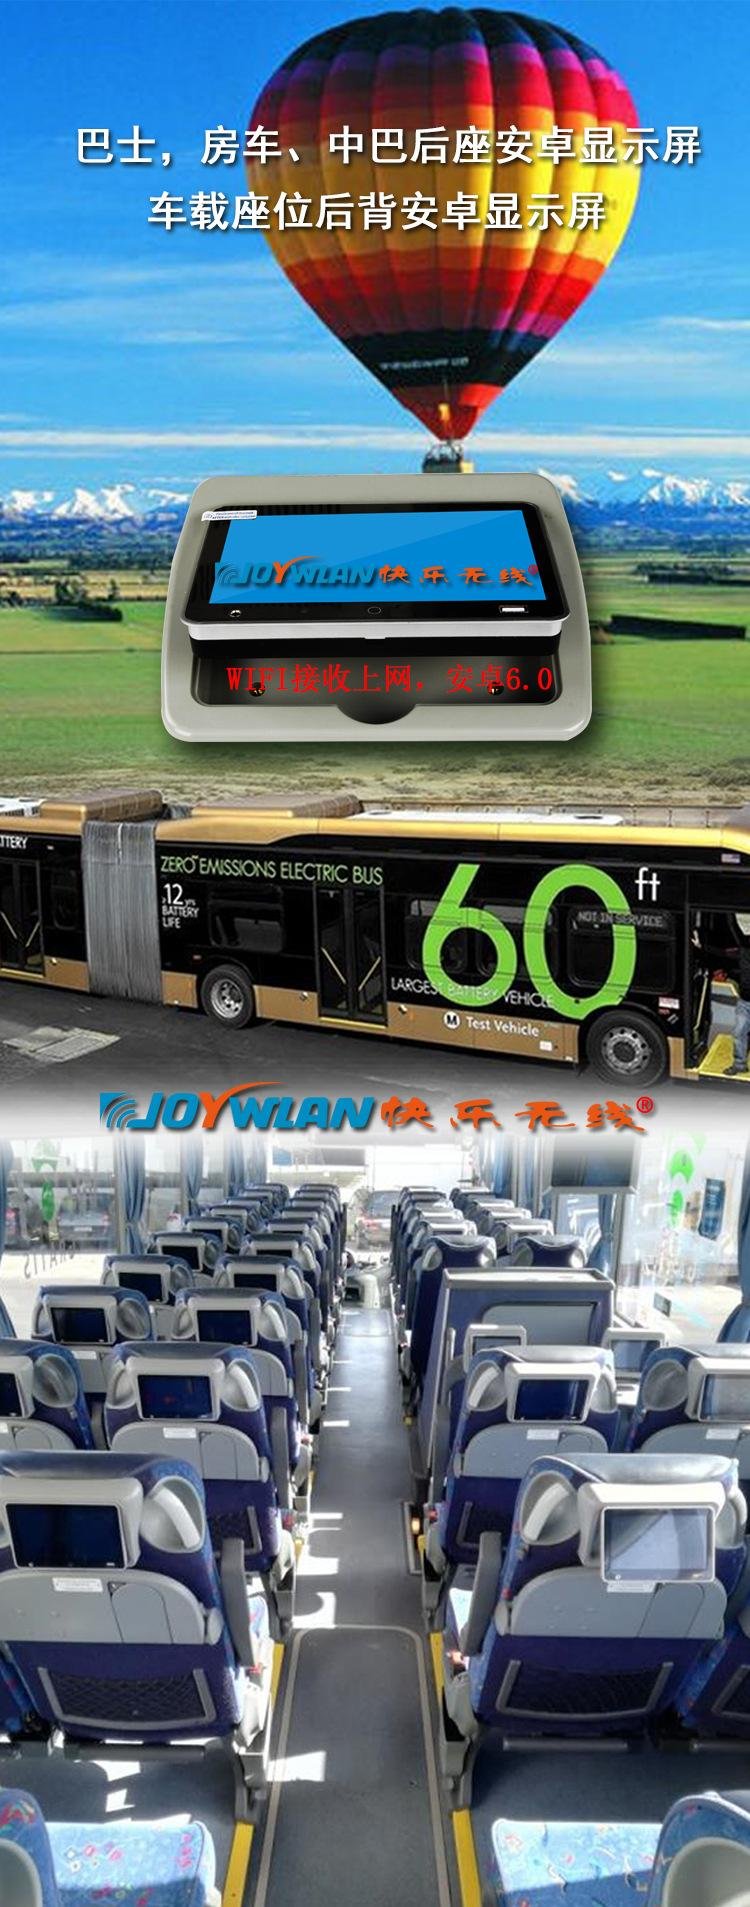 9 inch bus vod    Android monitor JOYWLAN